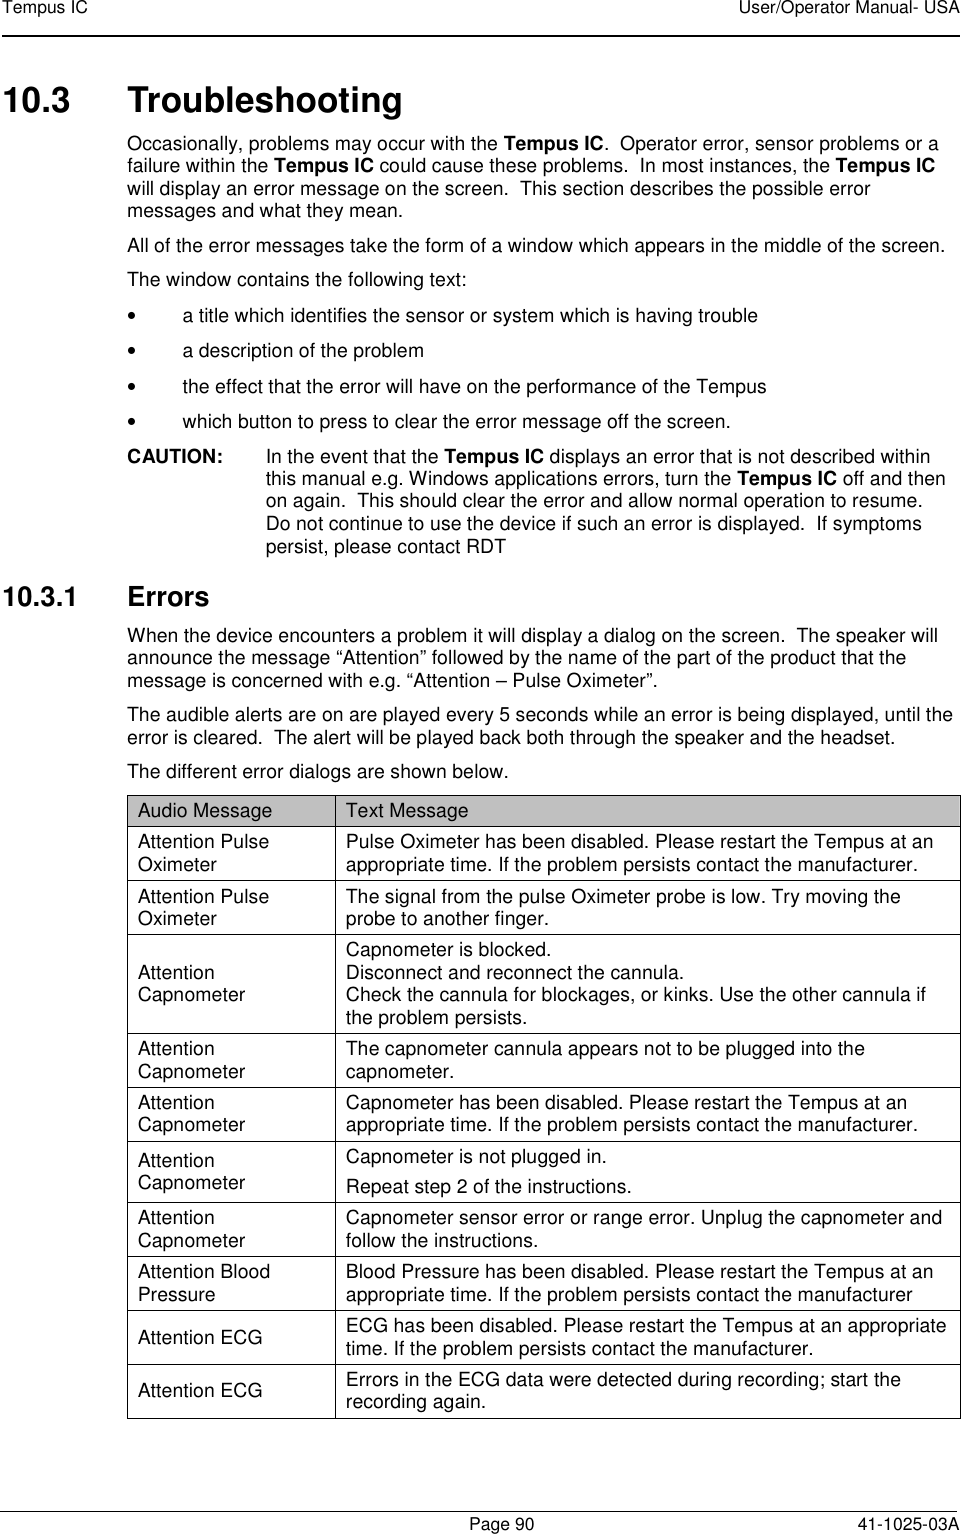 Tempus IC    User/Operator Manual- USA        Page 90   41-1025-03A 10.3  Troubleshooting Occasionally, problems may occur with the Tempus IC.  Operator error, sensor problems or a failure within the Tempus IC could cause these problems.  In most instances, the Tempus IC will display an error message on the screen.  This section describes the possible error messages and what they mean. All of the error messages take the form of a window which appears in the middle of the screen.   The window contains the following text: •  a title which identifies the sensor or system which is having trouble •  a description of the problem •  the effect that the error will have on the performance of the Tempus  •  which button to press to clear the error message off the screen. CAUTION:  In the event that the Tempus IC displays an error that is not described within this manual e.g. Windows applications errors, turn the Tempus IC off and then on again.  This should clear the error and allow normal operation to resume.  Do not continue to use the device if such an error is displayed.  If symptoms persist, please contact RDT  10.3.1  Errors When the device encounters a problem it will display a dialog on the screen.  The speaker will announce the message “Attention” followed by the name of the part of the product that the message is concerned with e.g. “Attention – Pulse Oximeter”. The audible alerts are on are played every 5 seconds while an error is being displayed, until the error is cleared.  The alert will be played back both through the speaker and the headset. The different error dialogs are shown below. Audio Message  Text Message Attention Pulse Oximeter  Pulse Oximeter has been disabled. Please restart the Tempus at an appropriate time. If the problem persists contact the manufacturer. Attention Pulse Oximeter  The signal from the pulse Oximeter probe is low. Try moving the probe to another finger. Attention Capnometer Capnometer is blocked. Disconnect and reconnect the cannula.   Check the cannula for blockages, or kinks. Use the other cannula if the problem persists. Attention Capnometer  The capnometer cannula appears not to be plugged into the capnometer. Attention Capnometer  Capnometer has been disabled. Please restart the Tempus at an appropriate time. If the problem persists contact the manufacturer. Attention Capnometer Capnometer is not plugged in. Repeat step 2 of the instructions. Attention Capnometer  Capnometer sensor error or range error. Unplug the capnometer and follow the instructions. Attention Blood Pressure  Blood Pressure has been disabled. Please restart the Tempus at an appropriate time. If the problem persists contact the manufacturer Attention ECG  ECG has been disabled. Please restart the Tempus at an appropriate time. If the problem persists contact the manufacturer. Attention ECG  Errors in the ECG data were detected during recording; start the recording again. 